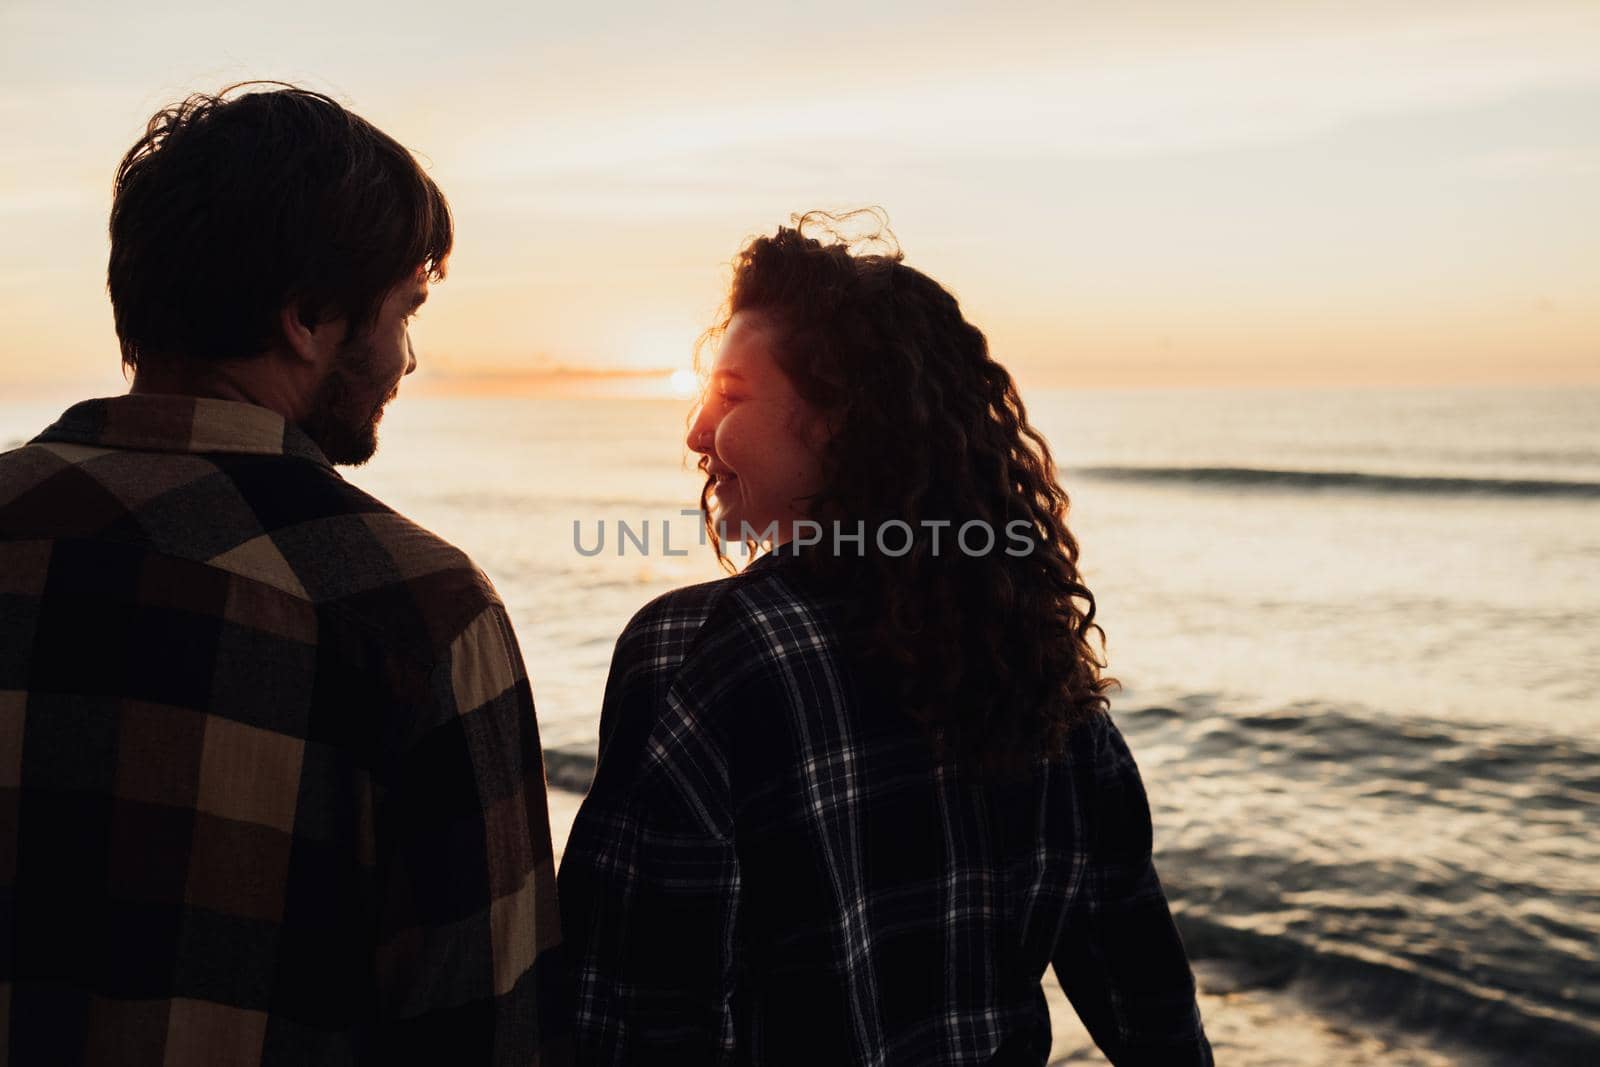 Woman and man holding hands together and walking along sea coast at dawn, young couple meeting sunrise together